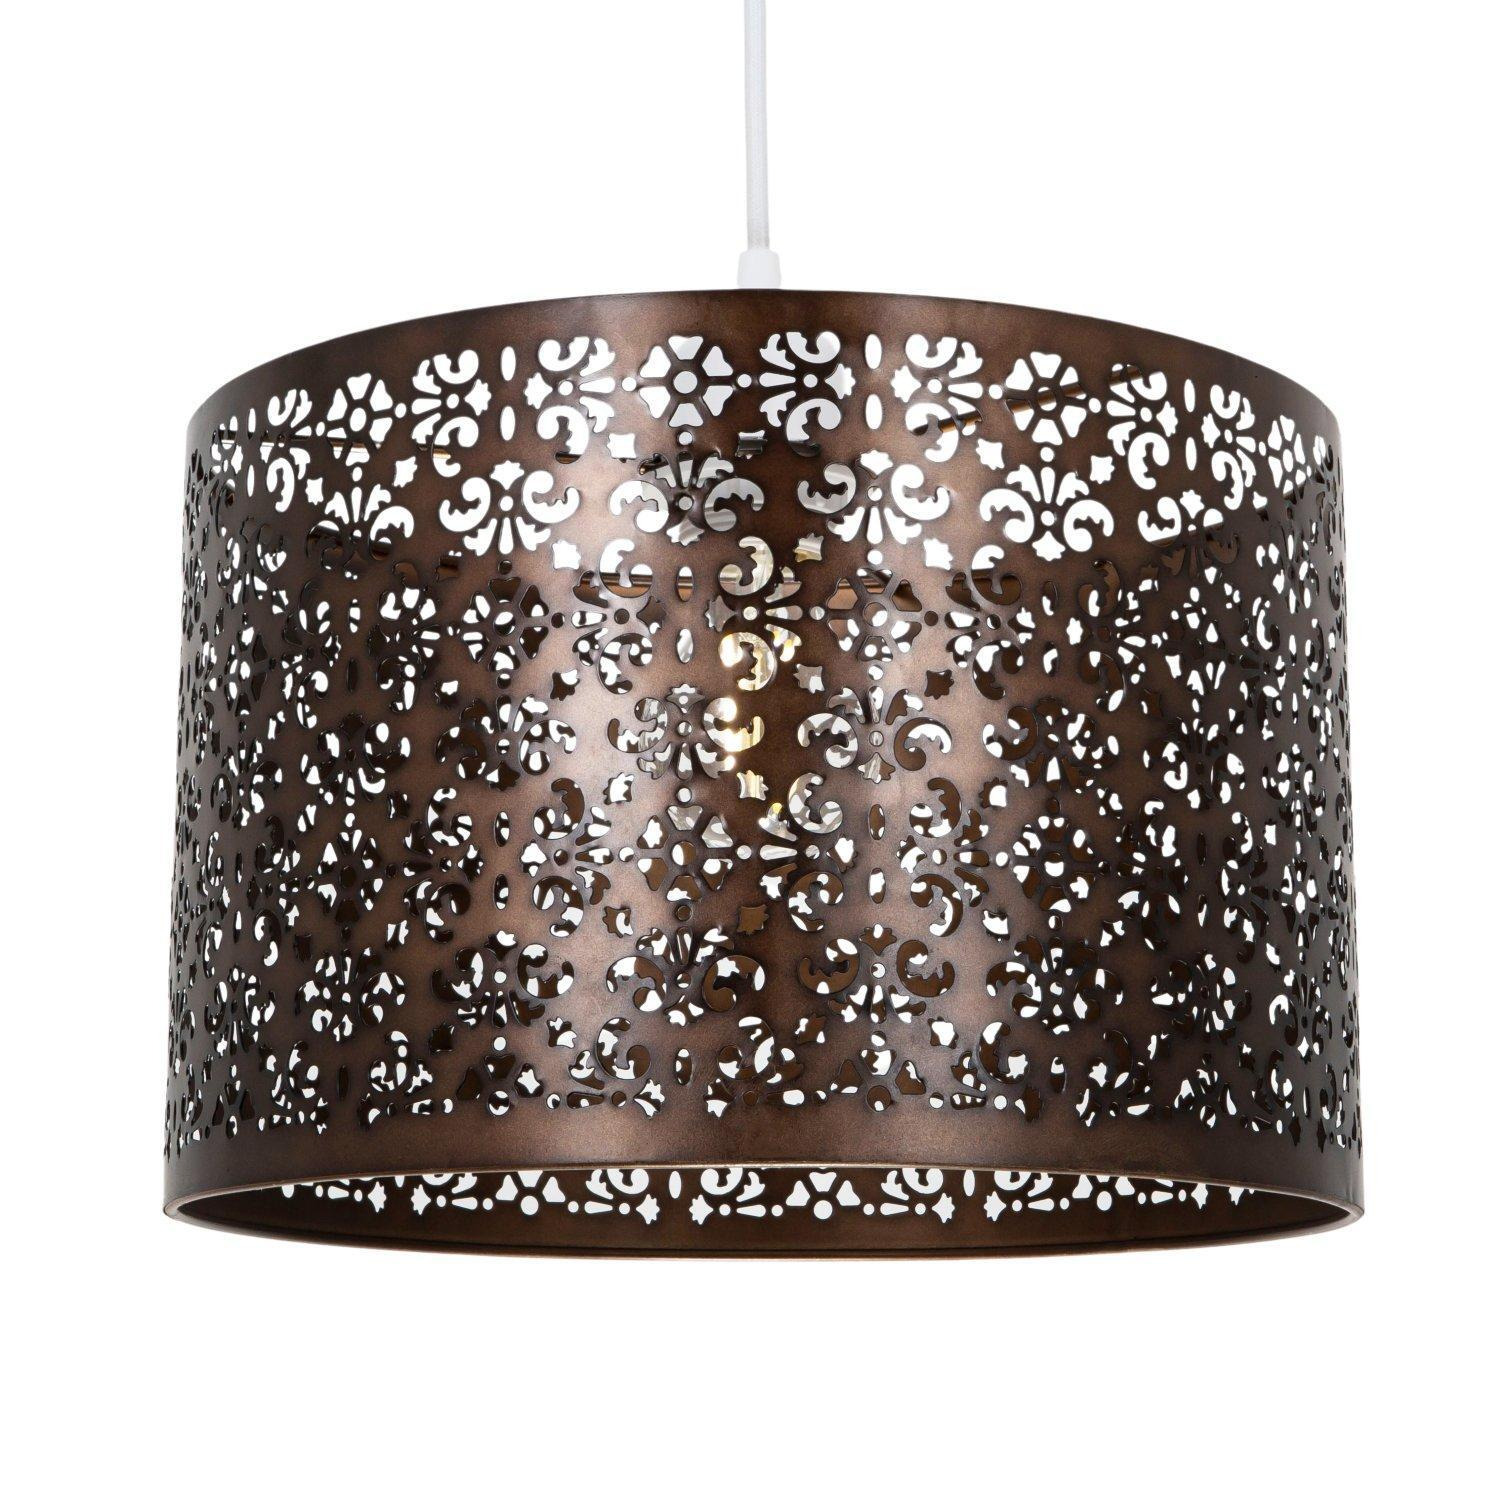 Marrakech Designed Metal Pendant Light Shade with Floral Decoration - image 1